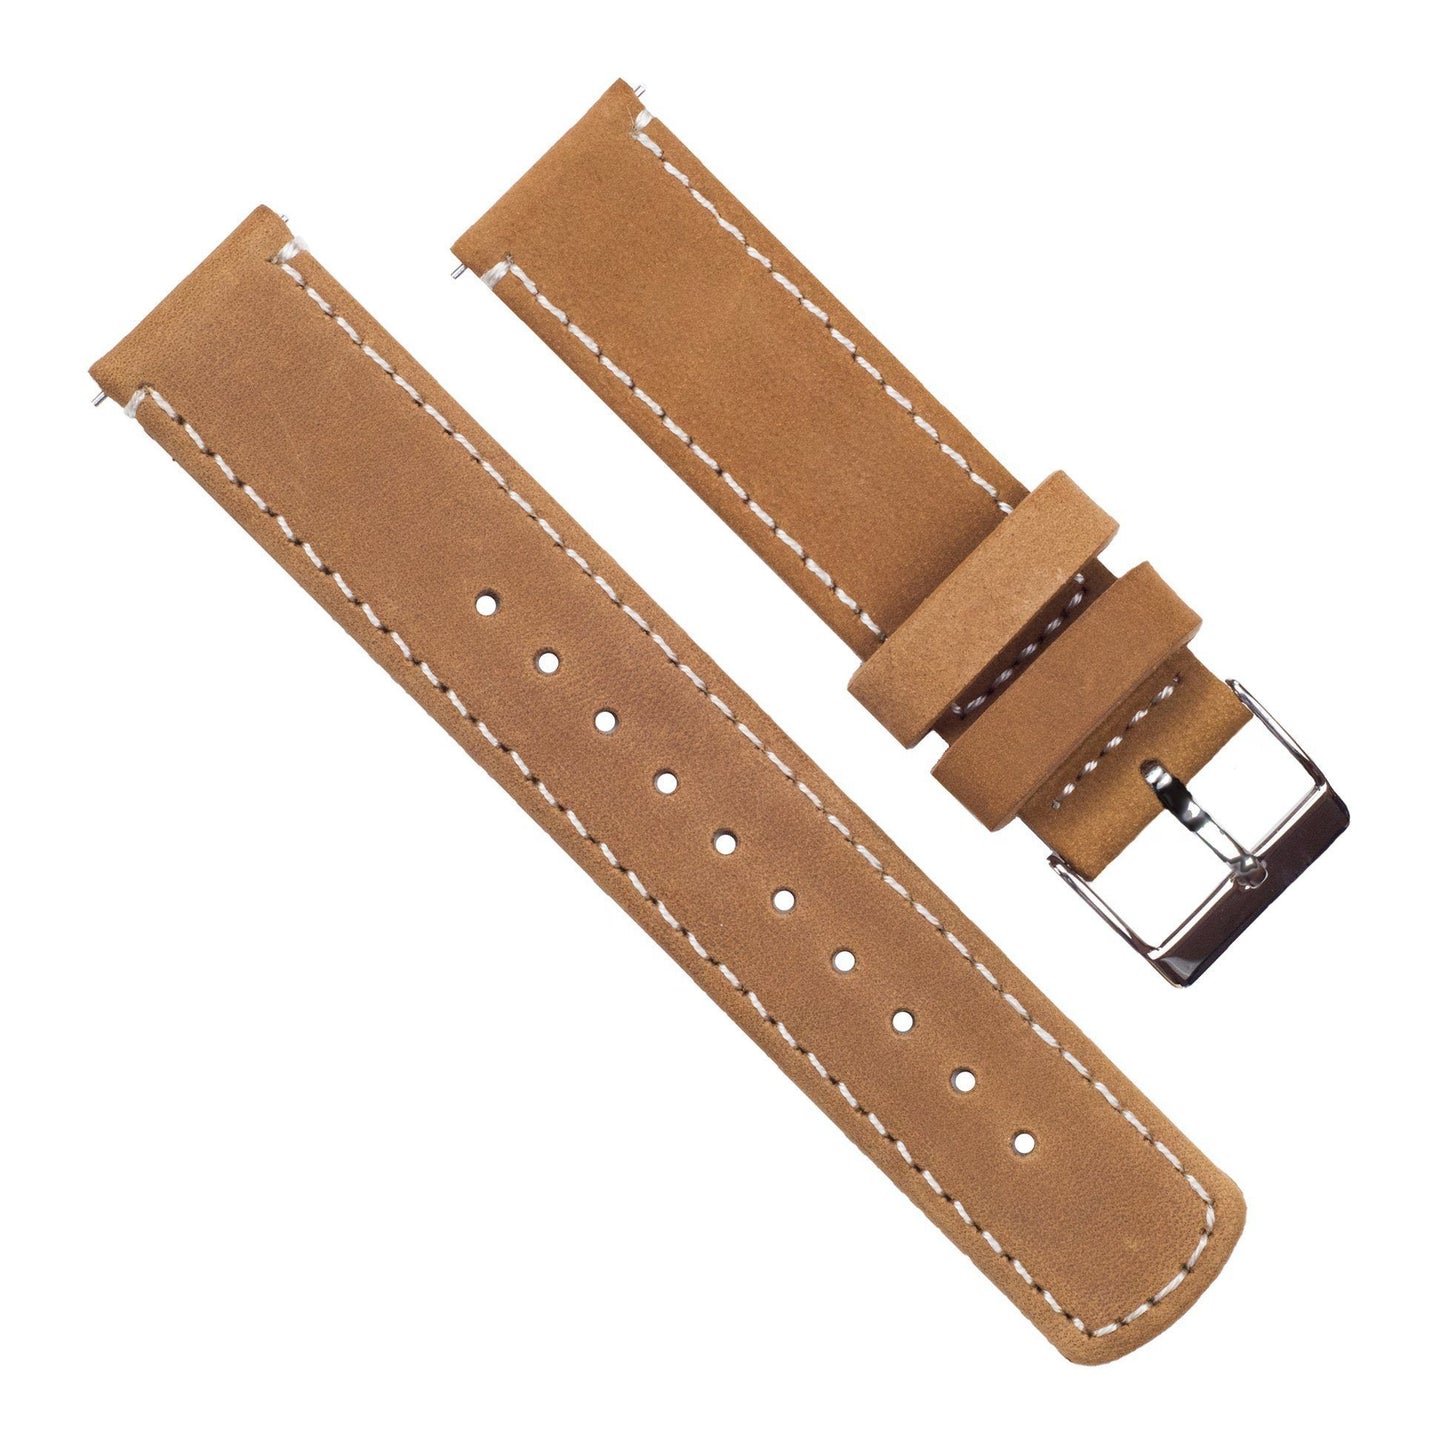 Samsung Galaxy Watch Active | Gingerbread Brown Leather & Linen White Stitching - Barton Watch Bands